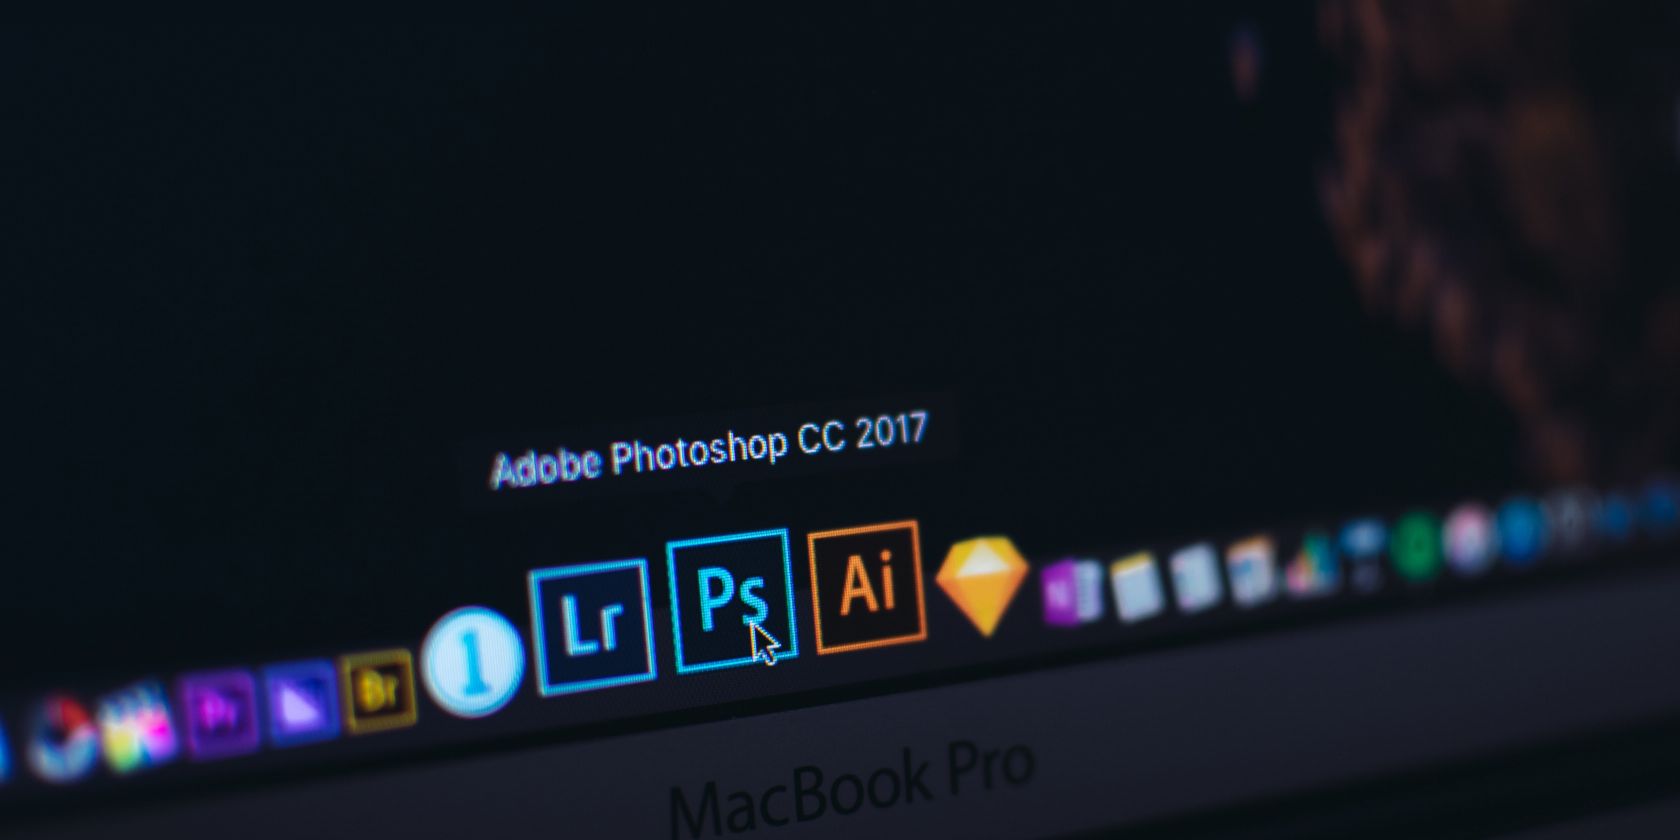 You Can Now Use Adobe Photoshop for Free on the Web